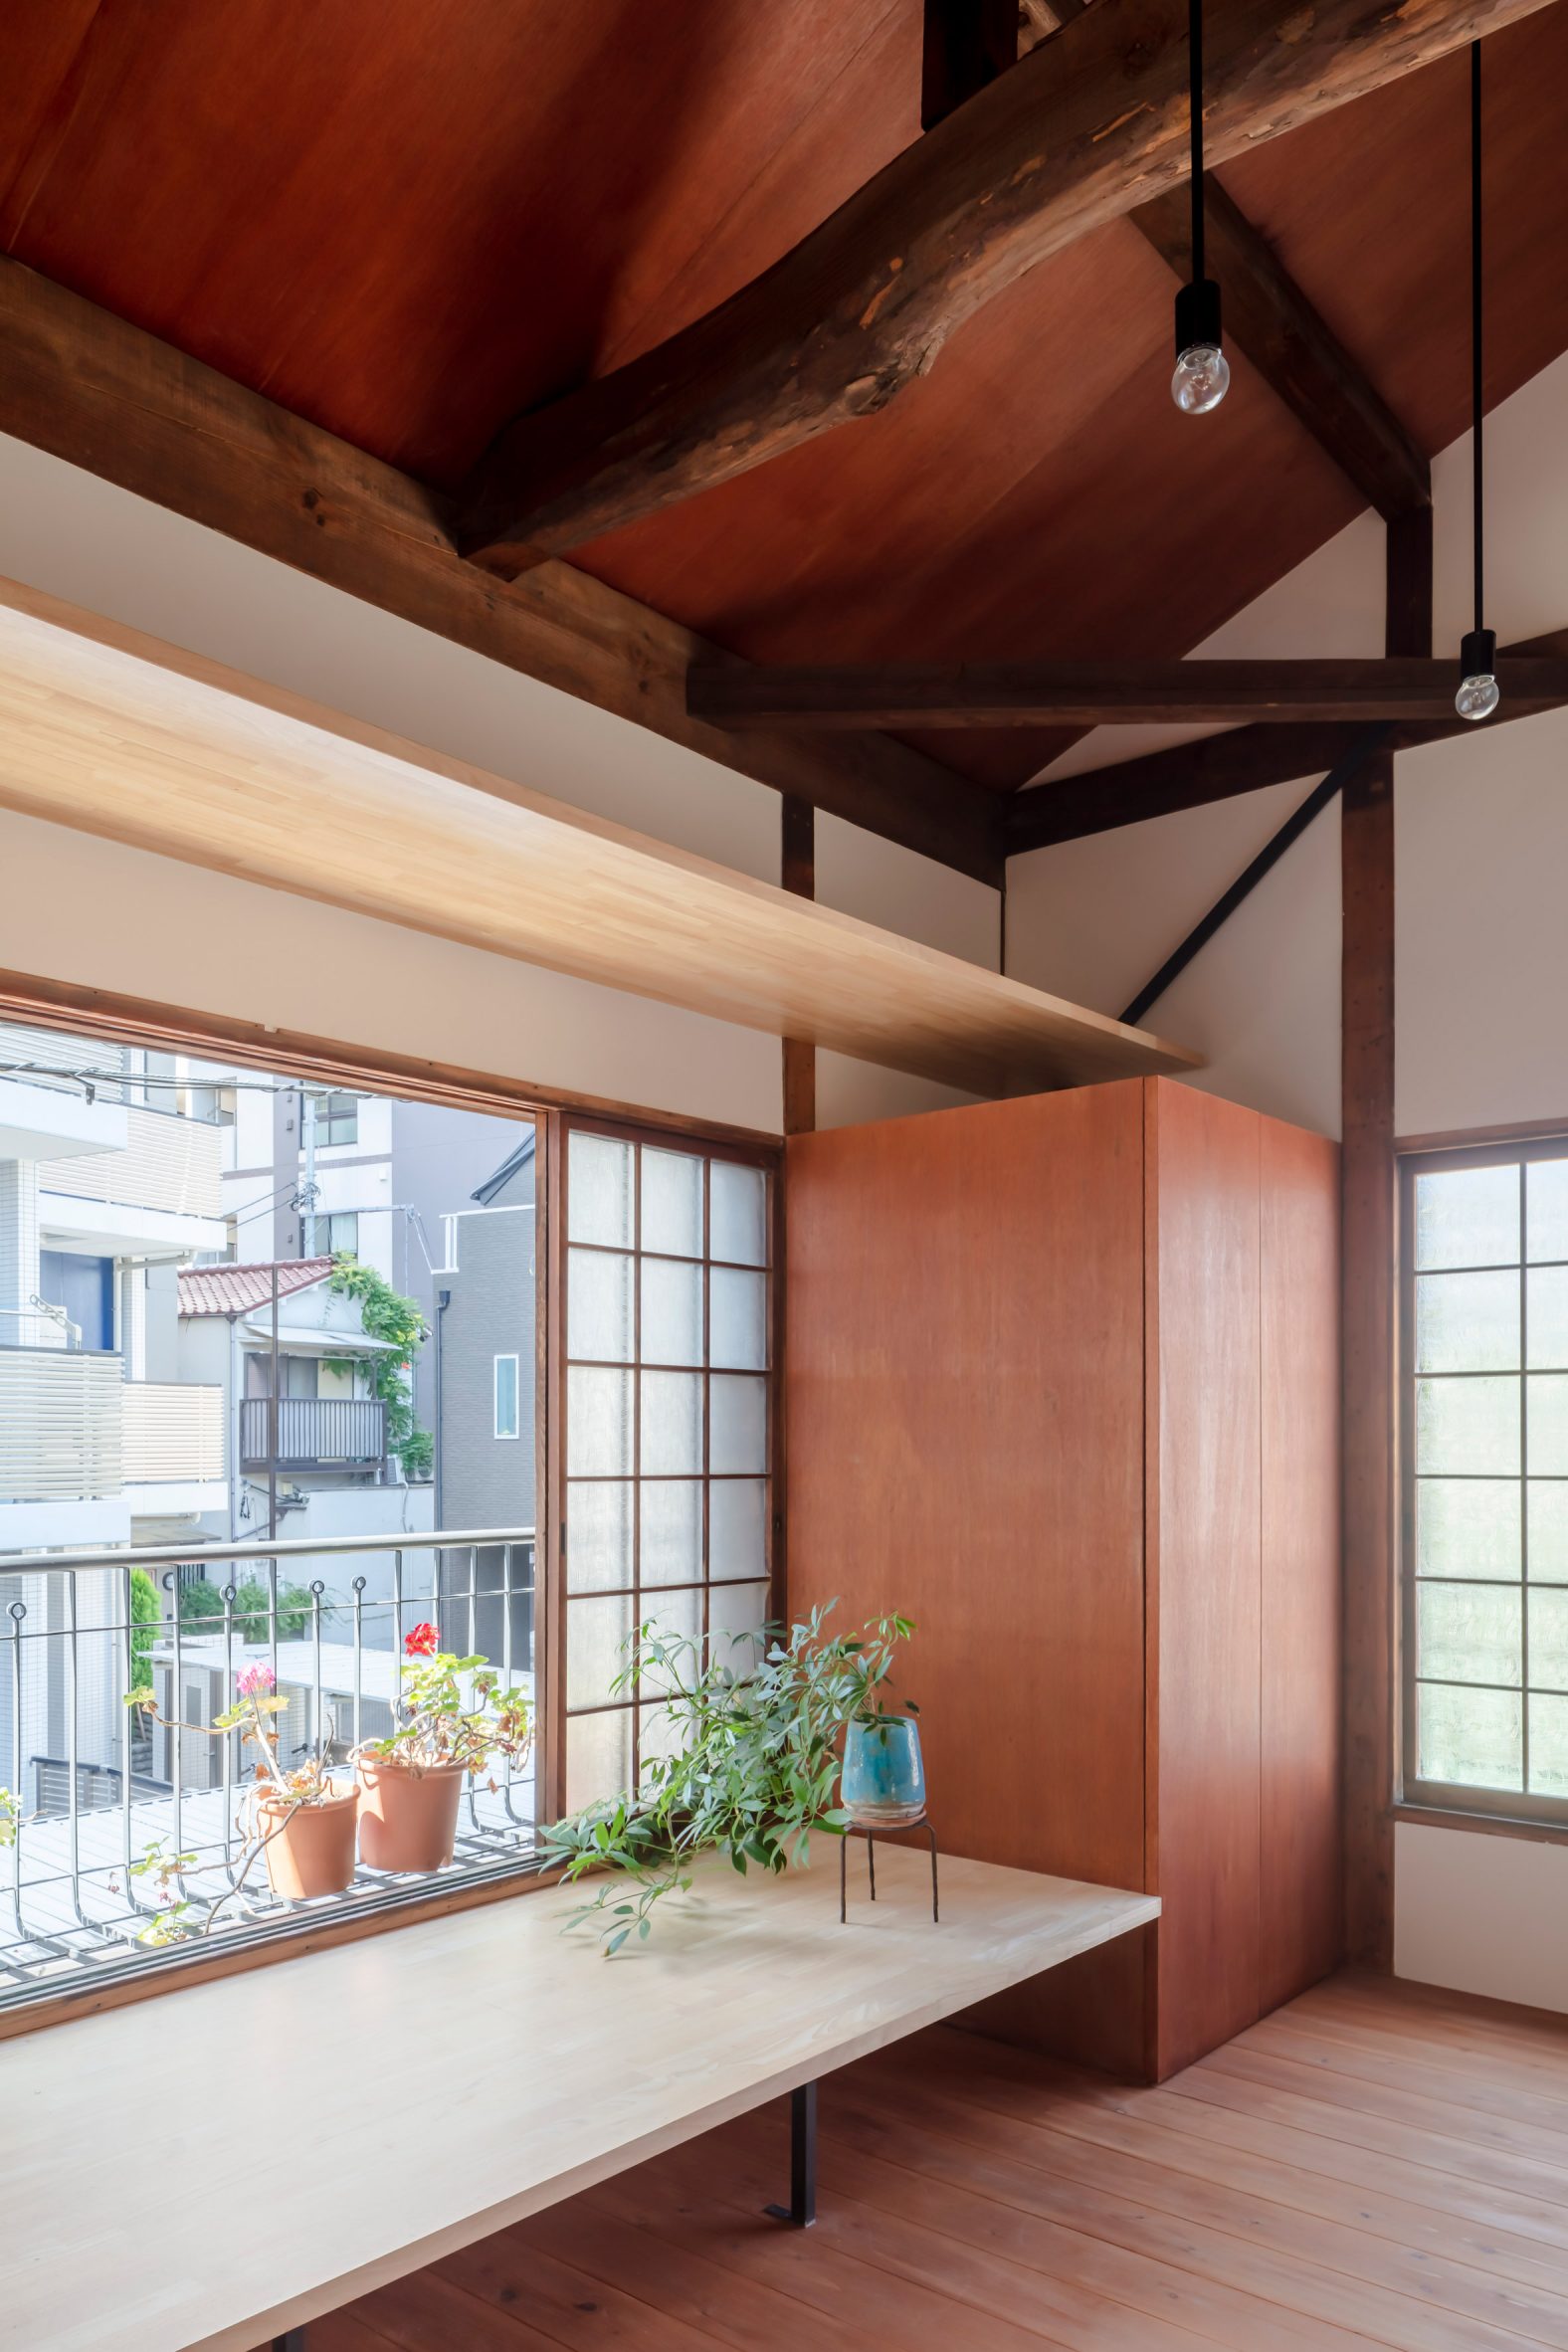 Japanese windows with shelves and bench